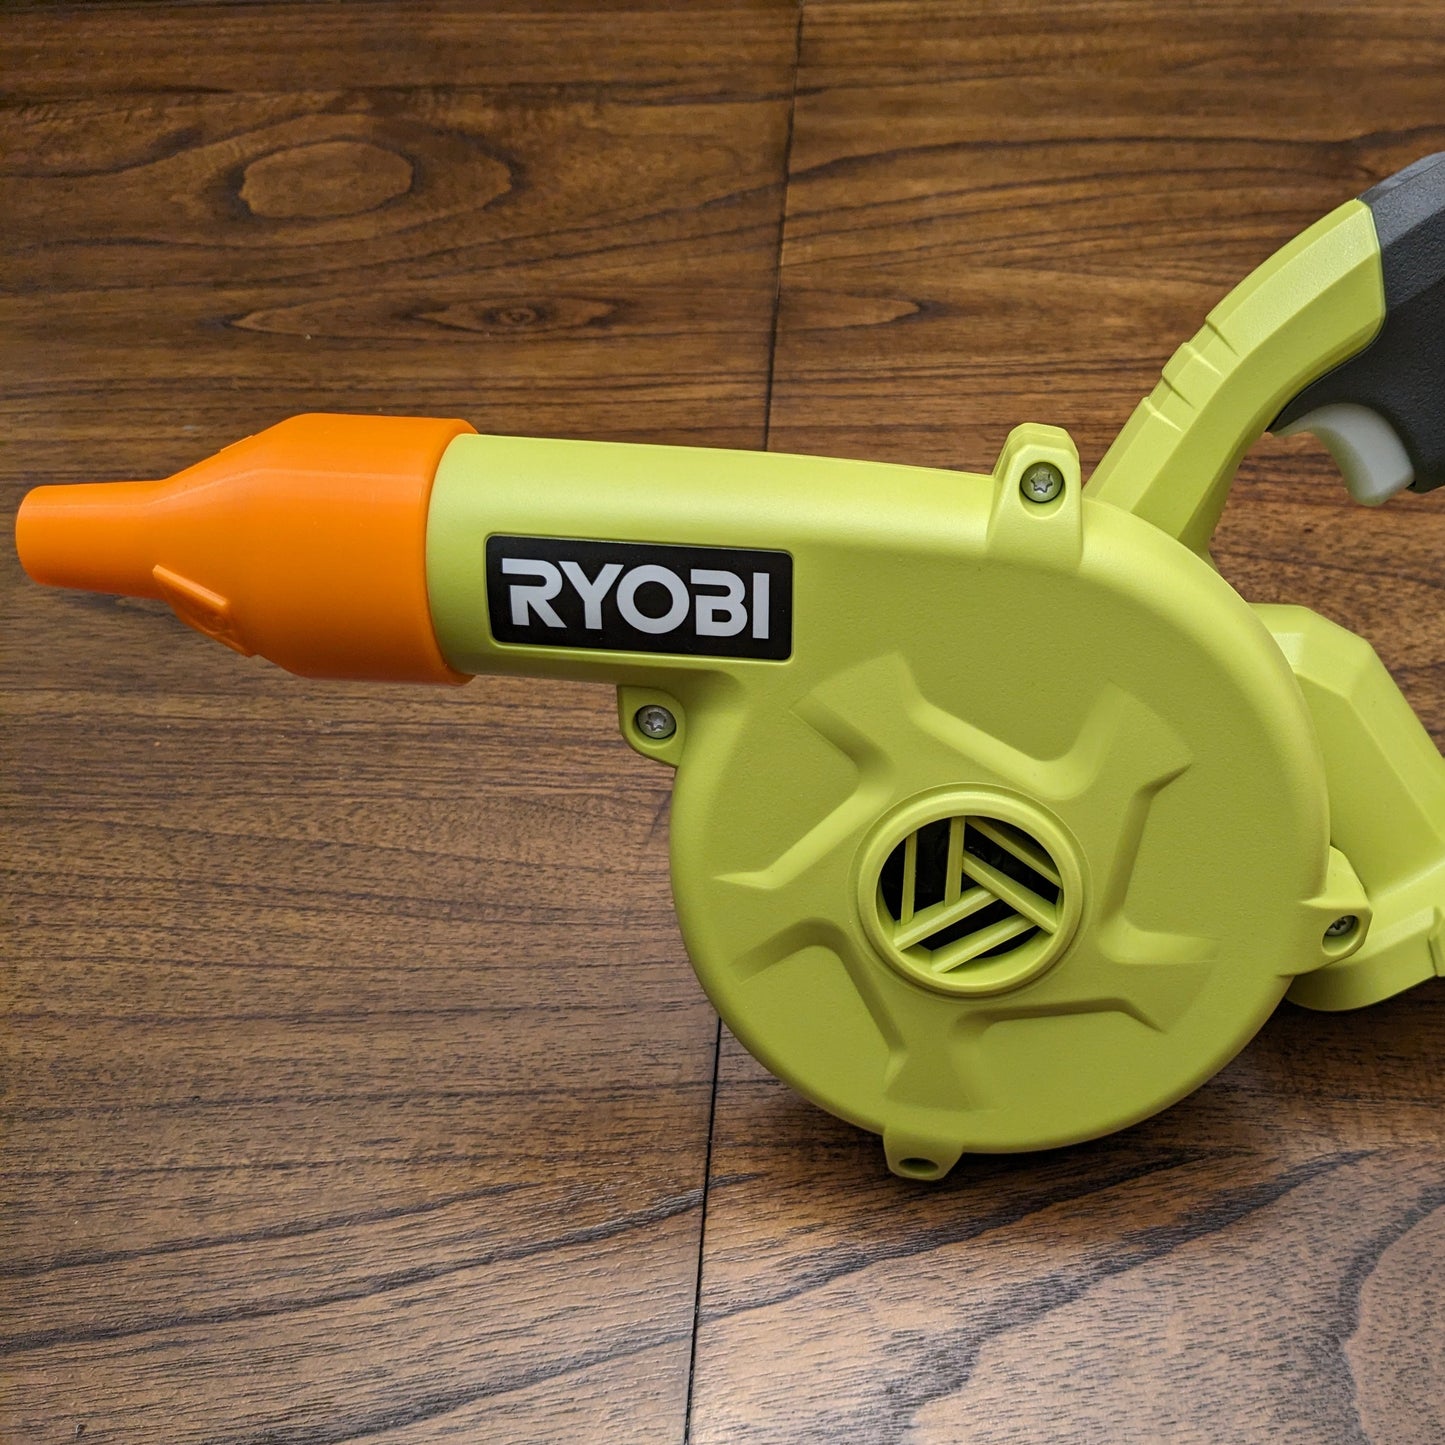 Ryobi Blower Adaptor for Leafield C7 and D7 Valves